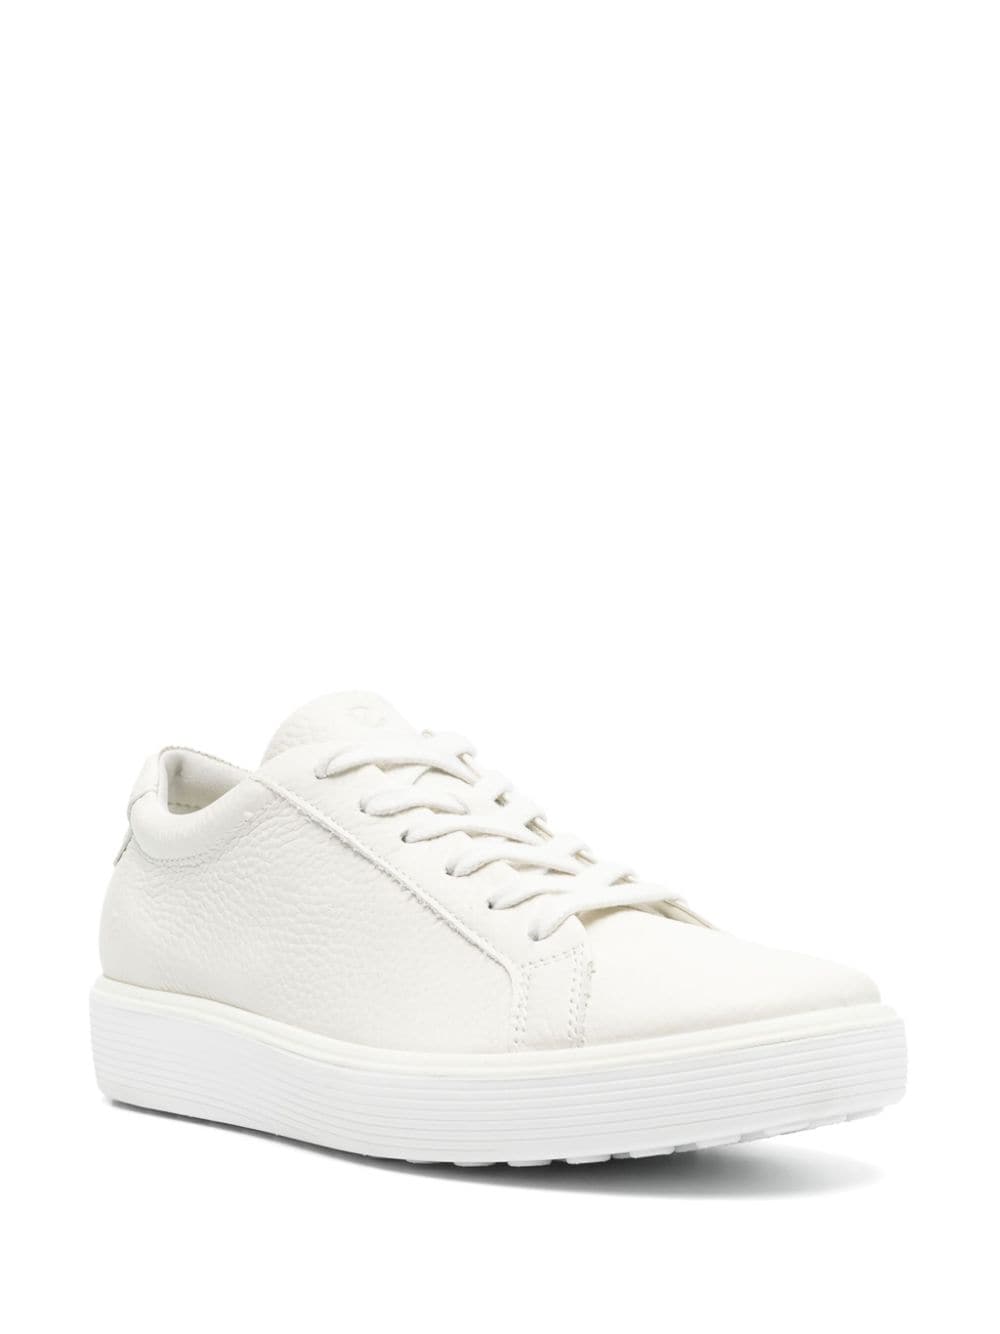 ECCO Soft 60 leather sneakers - Beige